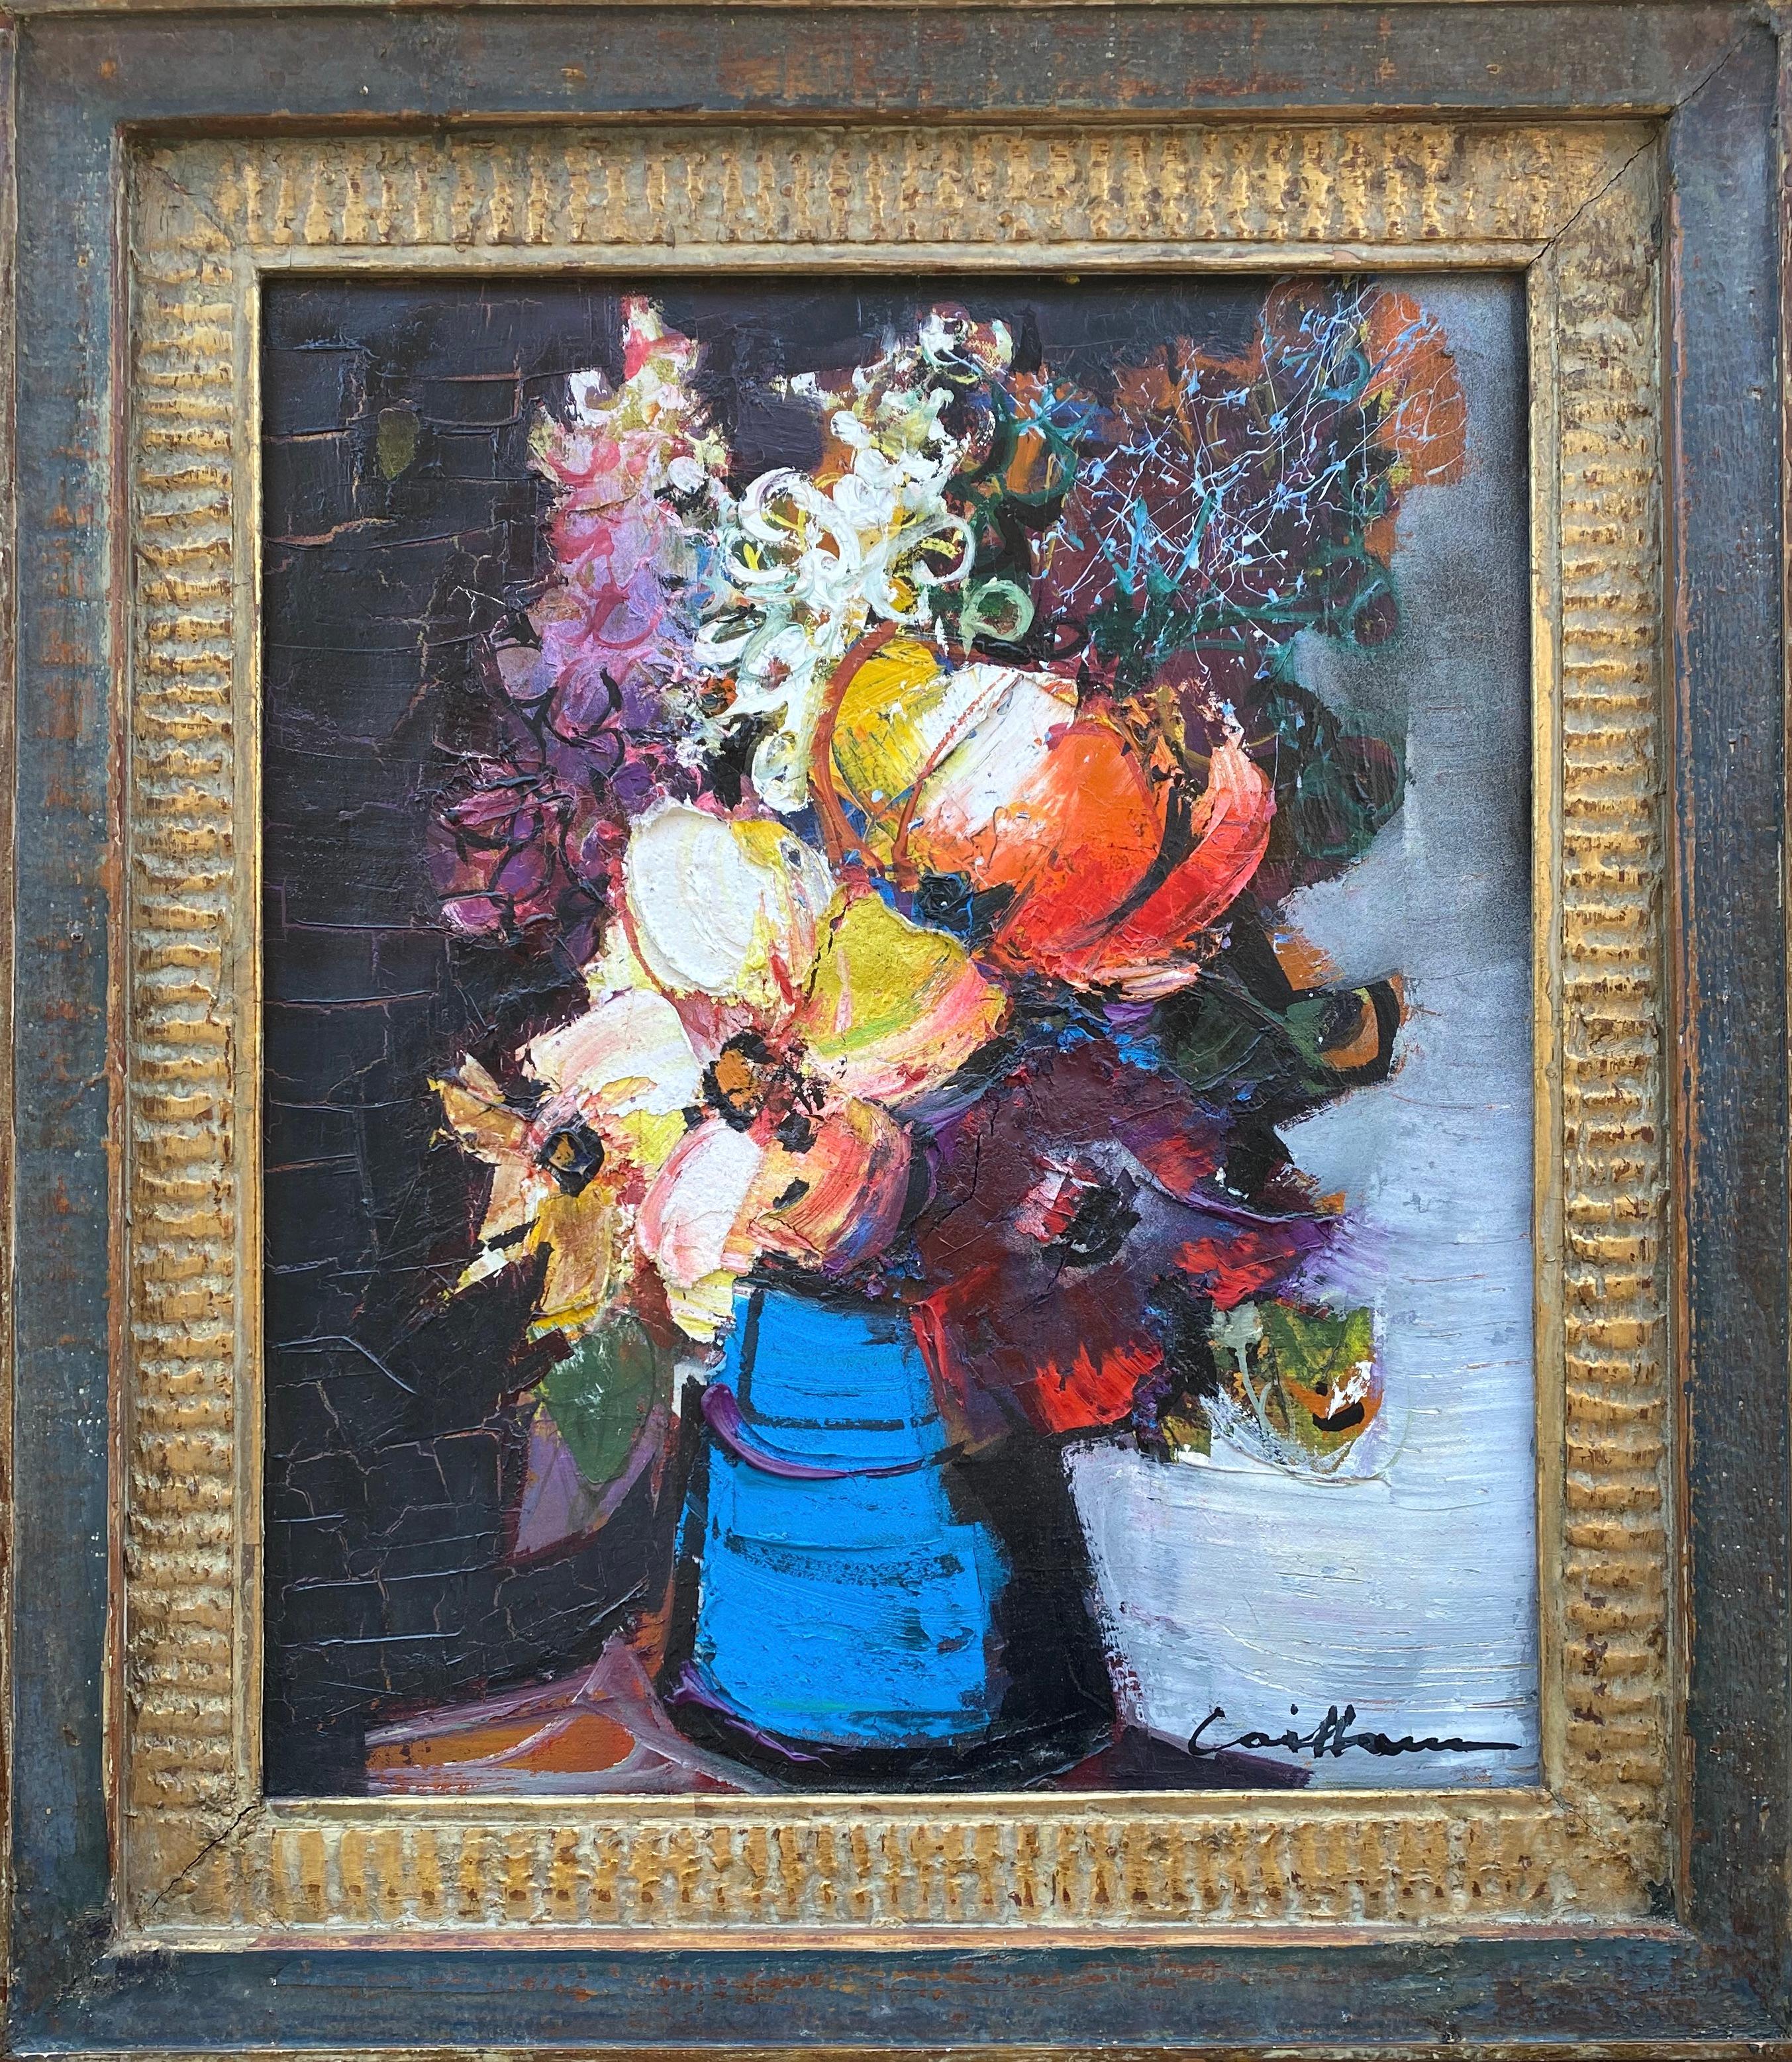 Rodolphe Caillaux Figurative Painting - Colorful eye popping mid century floral still life, modern jazzy flower painting